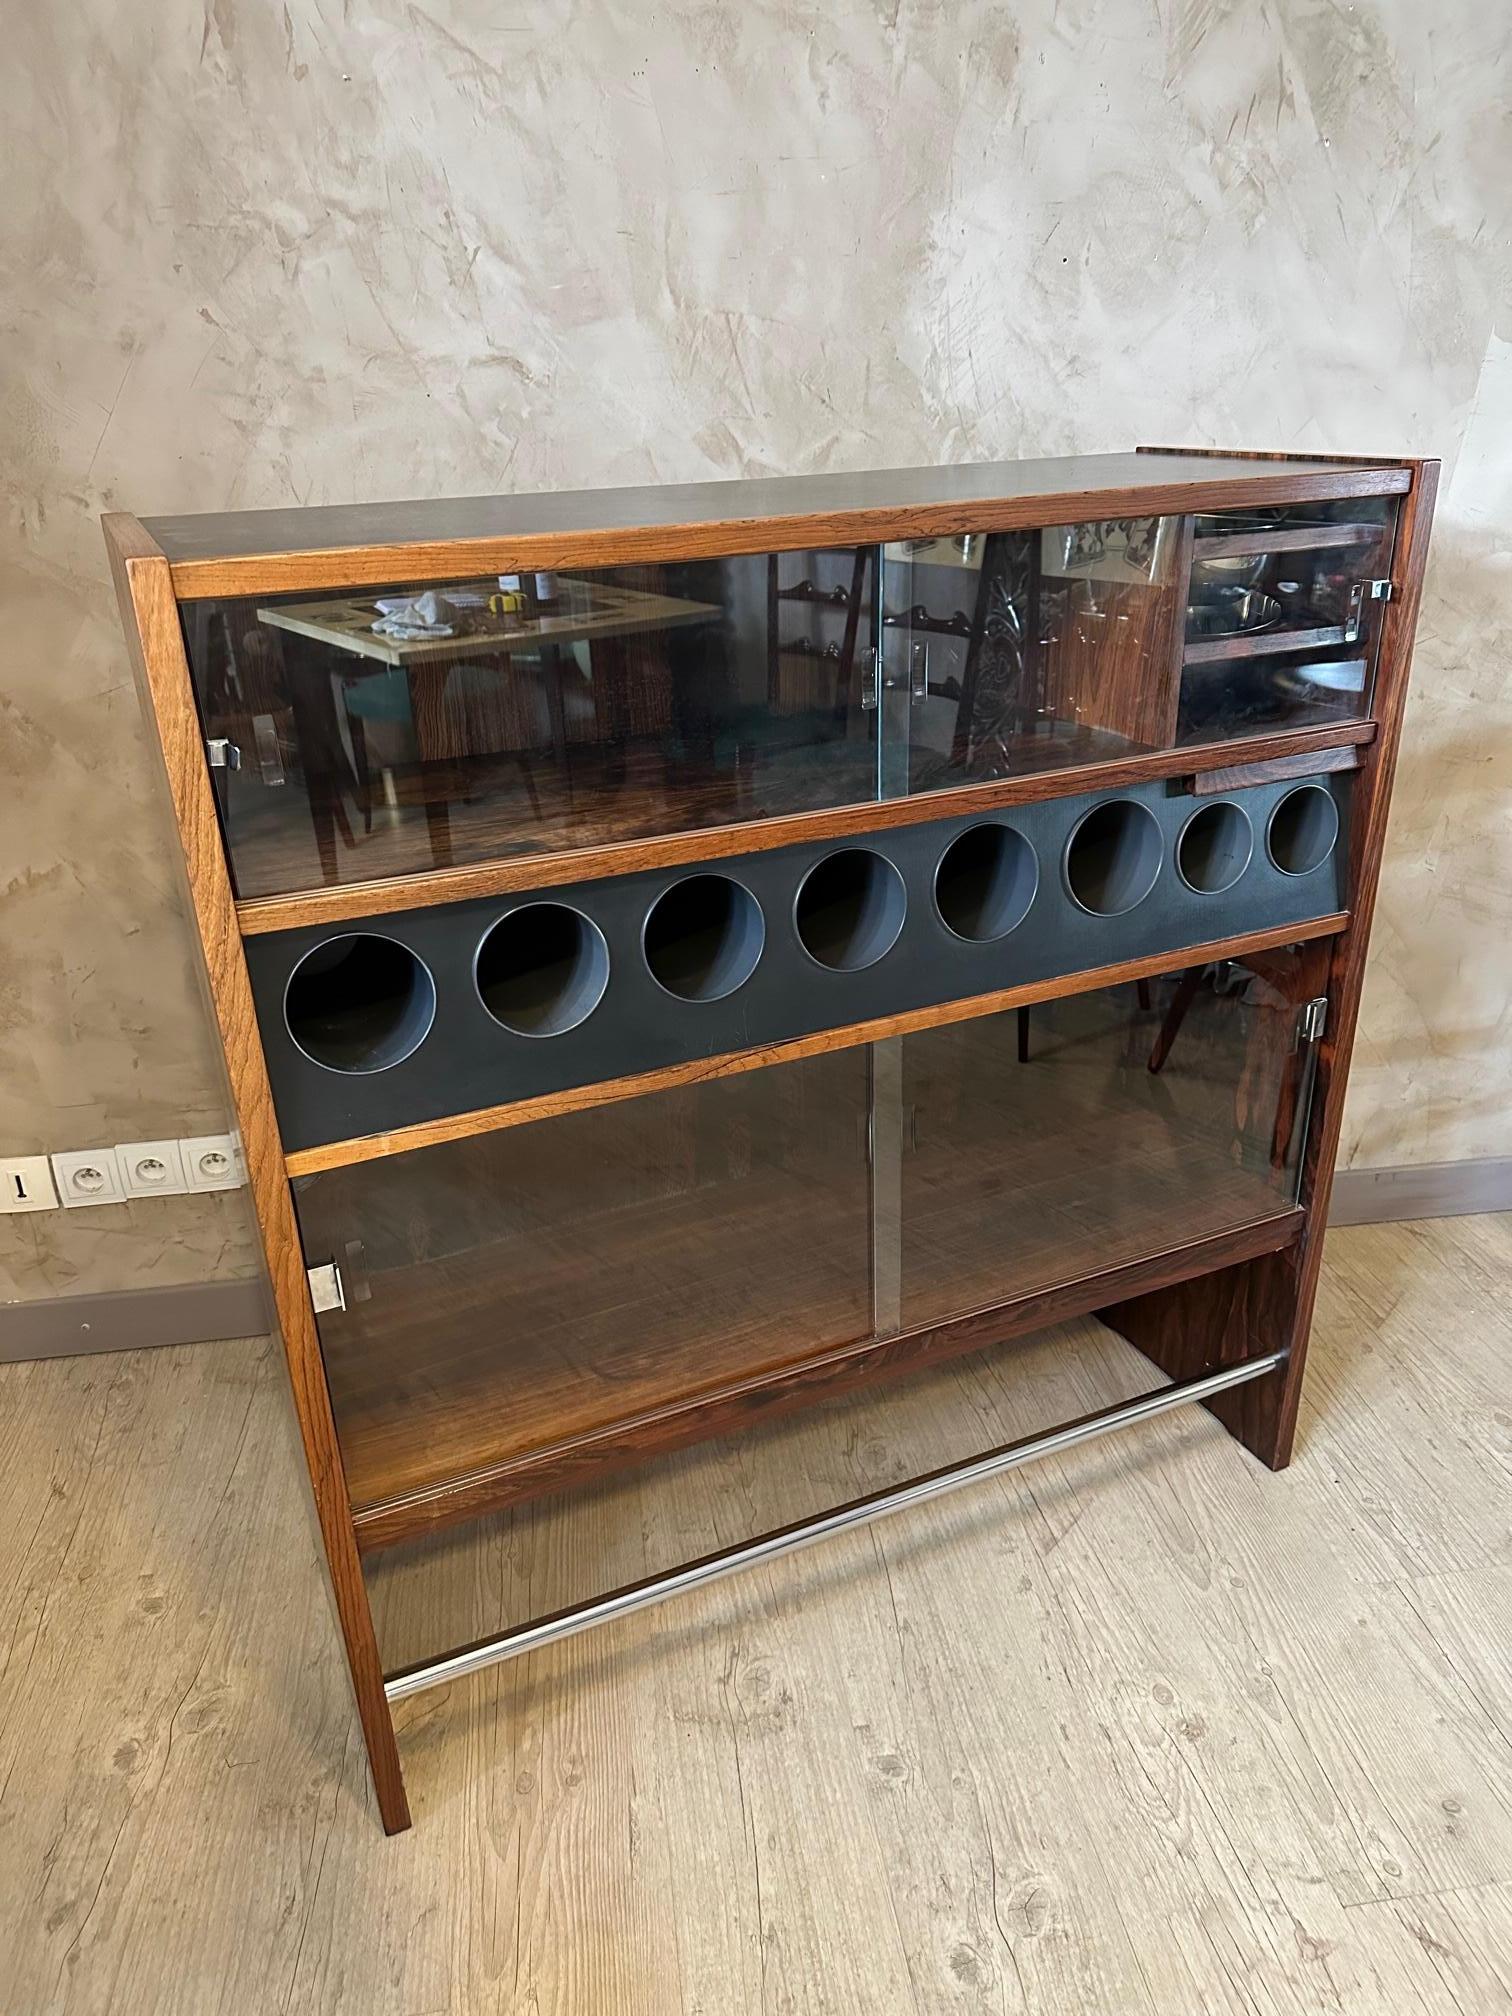 Very nice teak bar and its three Danish stools designed by Erik Buch for Oddense Maskinsdkeri in the 60s. Very good condition.
Bartender side: 8 bottle compartments, two bowls for ice cubes and utensils, a shelf for glasses. Several shelves closed